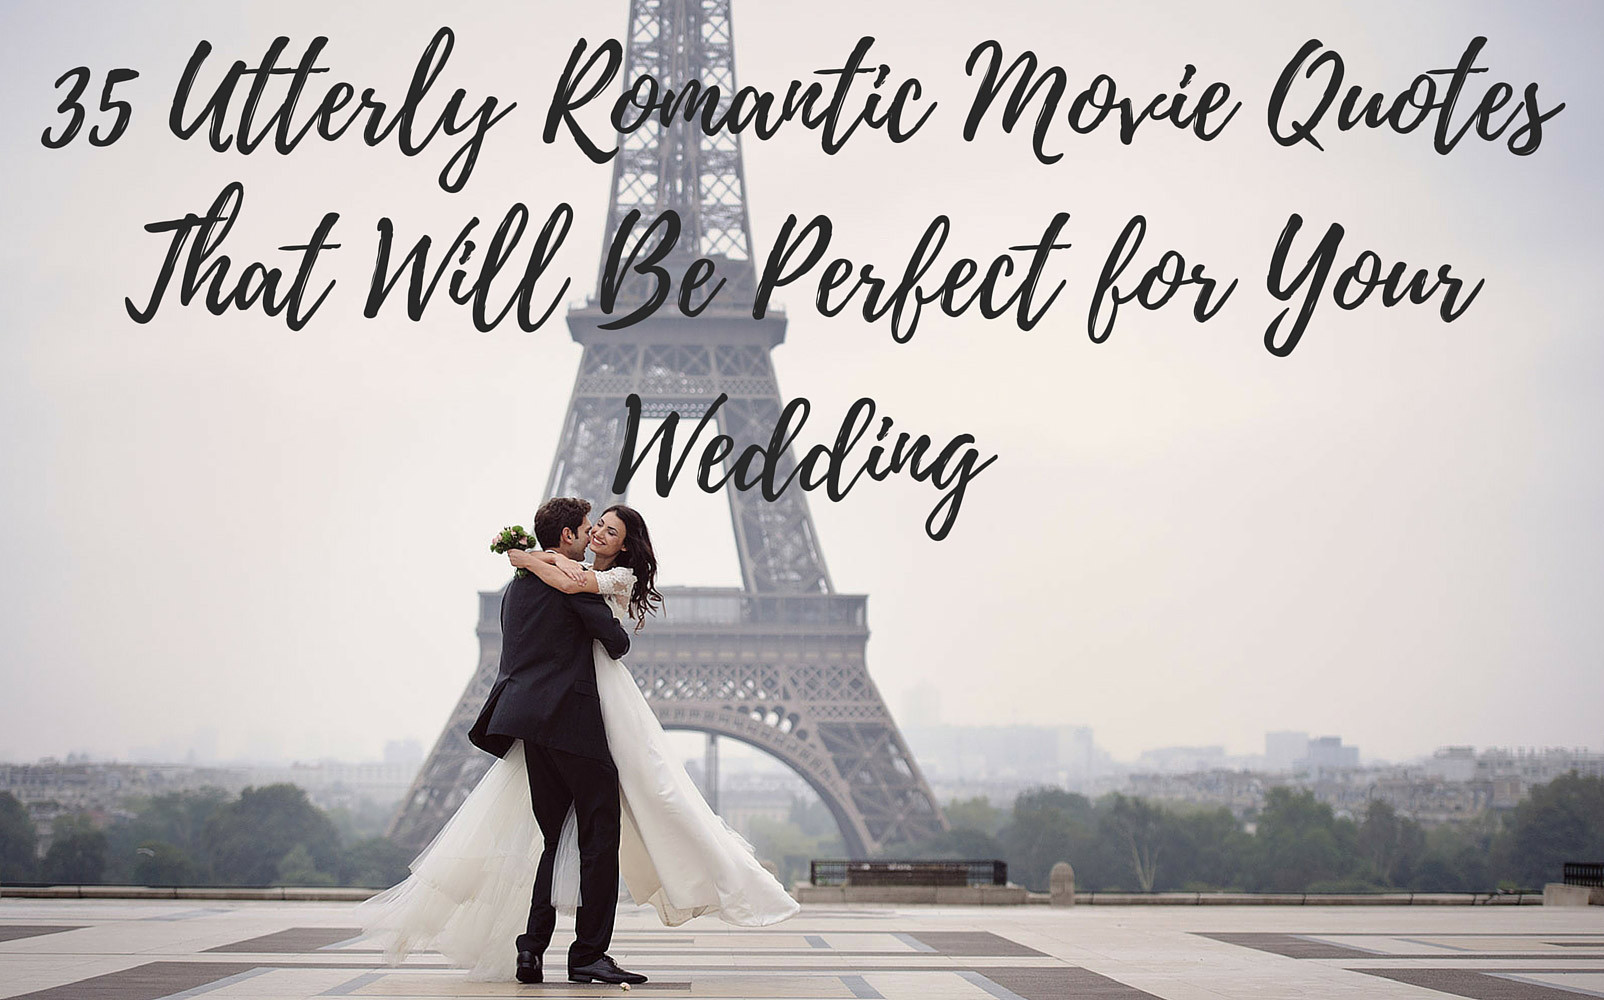 Most Romantic Movie Quotes
 Utterly Romantic Quotes from Movies